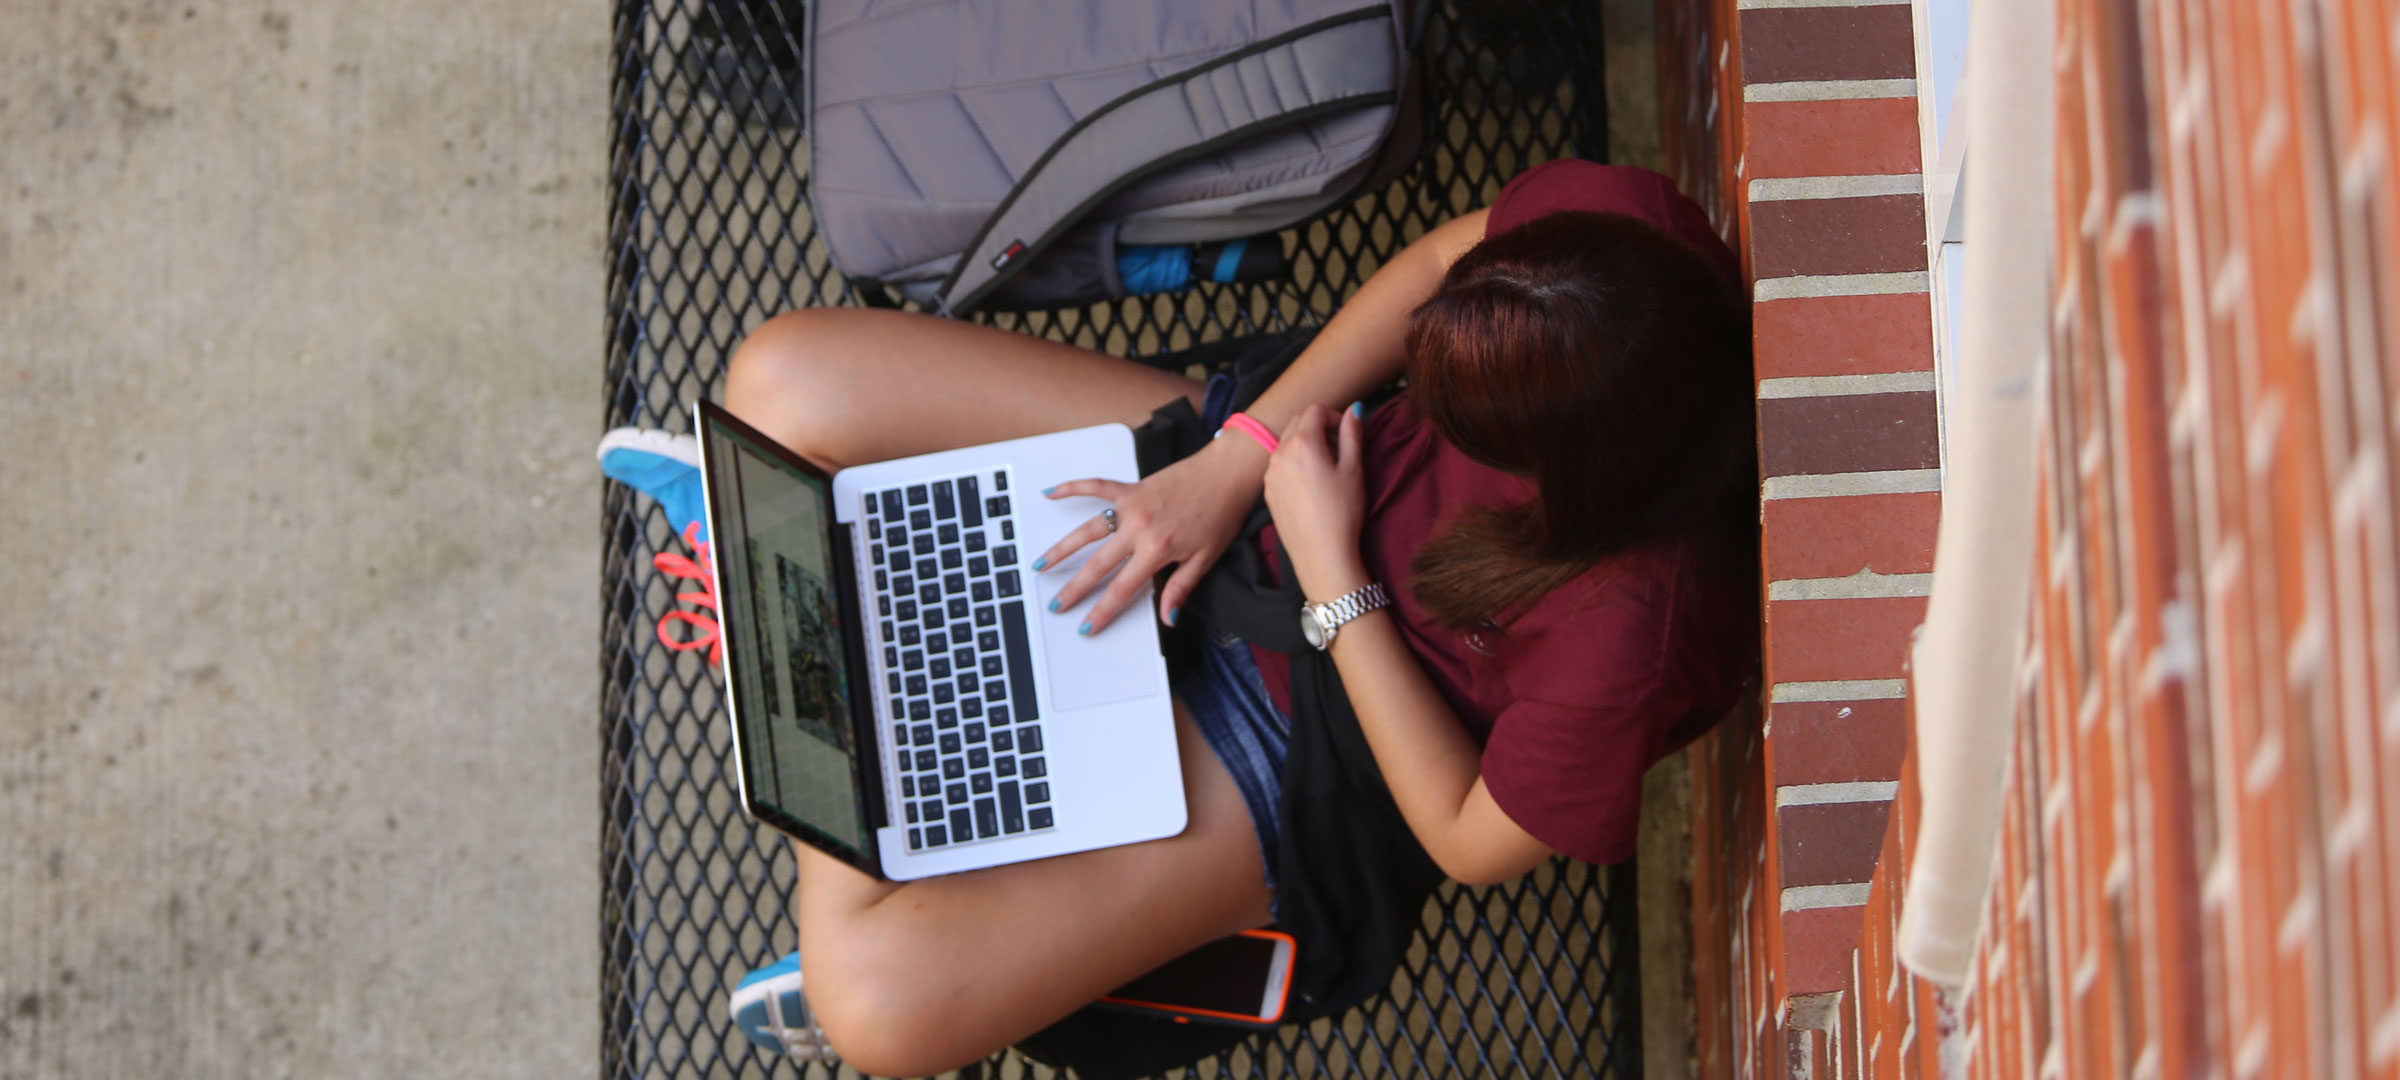 University of Louisiana at Lafayette student sits on campus and looks at her laptop while leaning against a brick wall